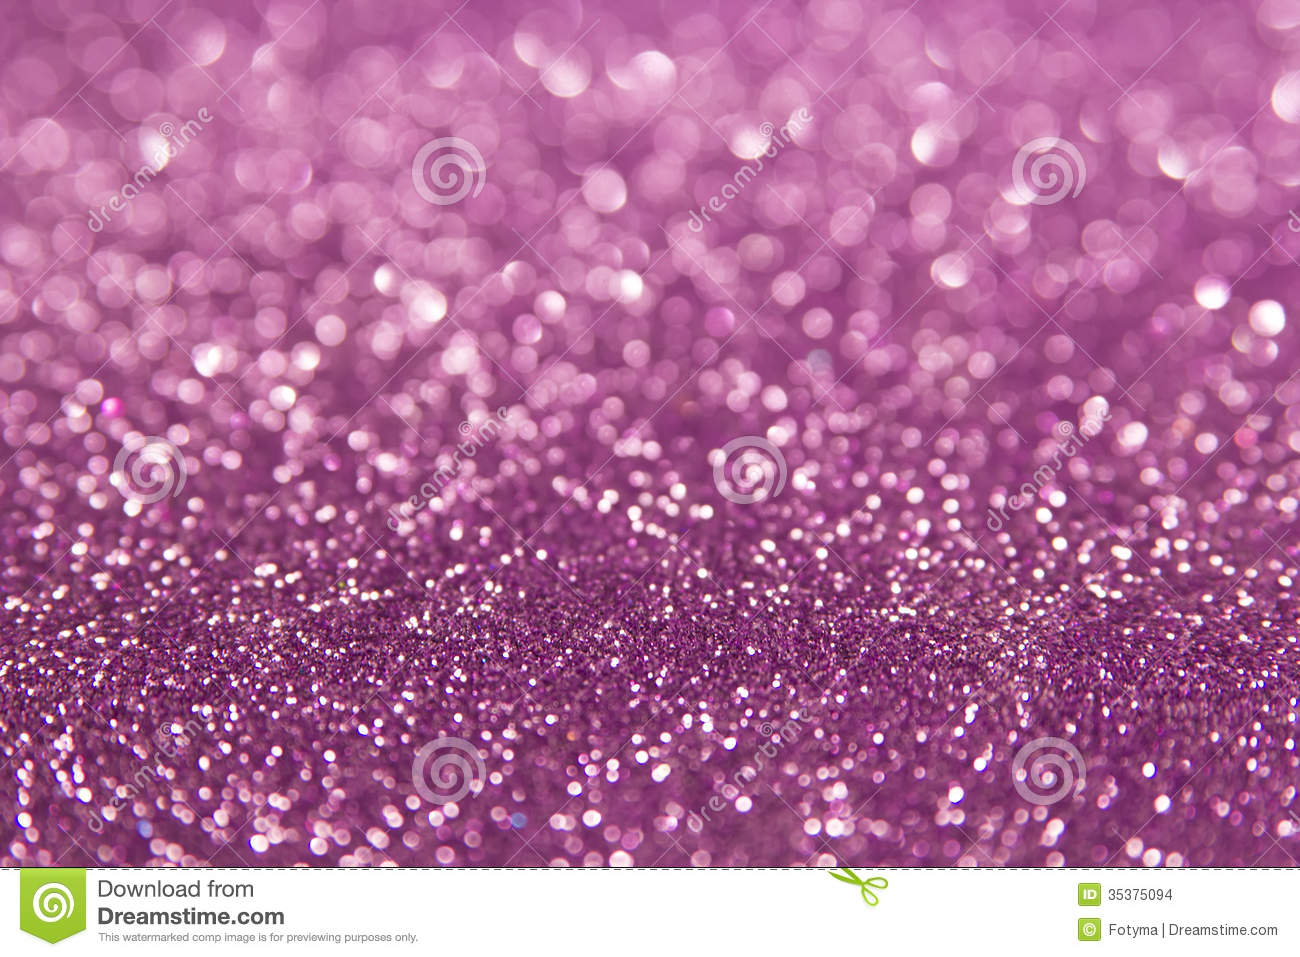 Purple Glitter Wallpaper   HD Wallpapers and Pictures 1300x957